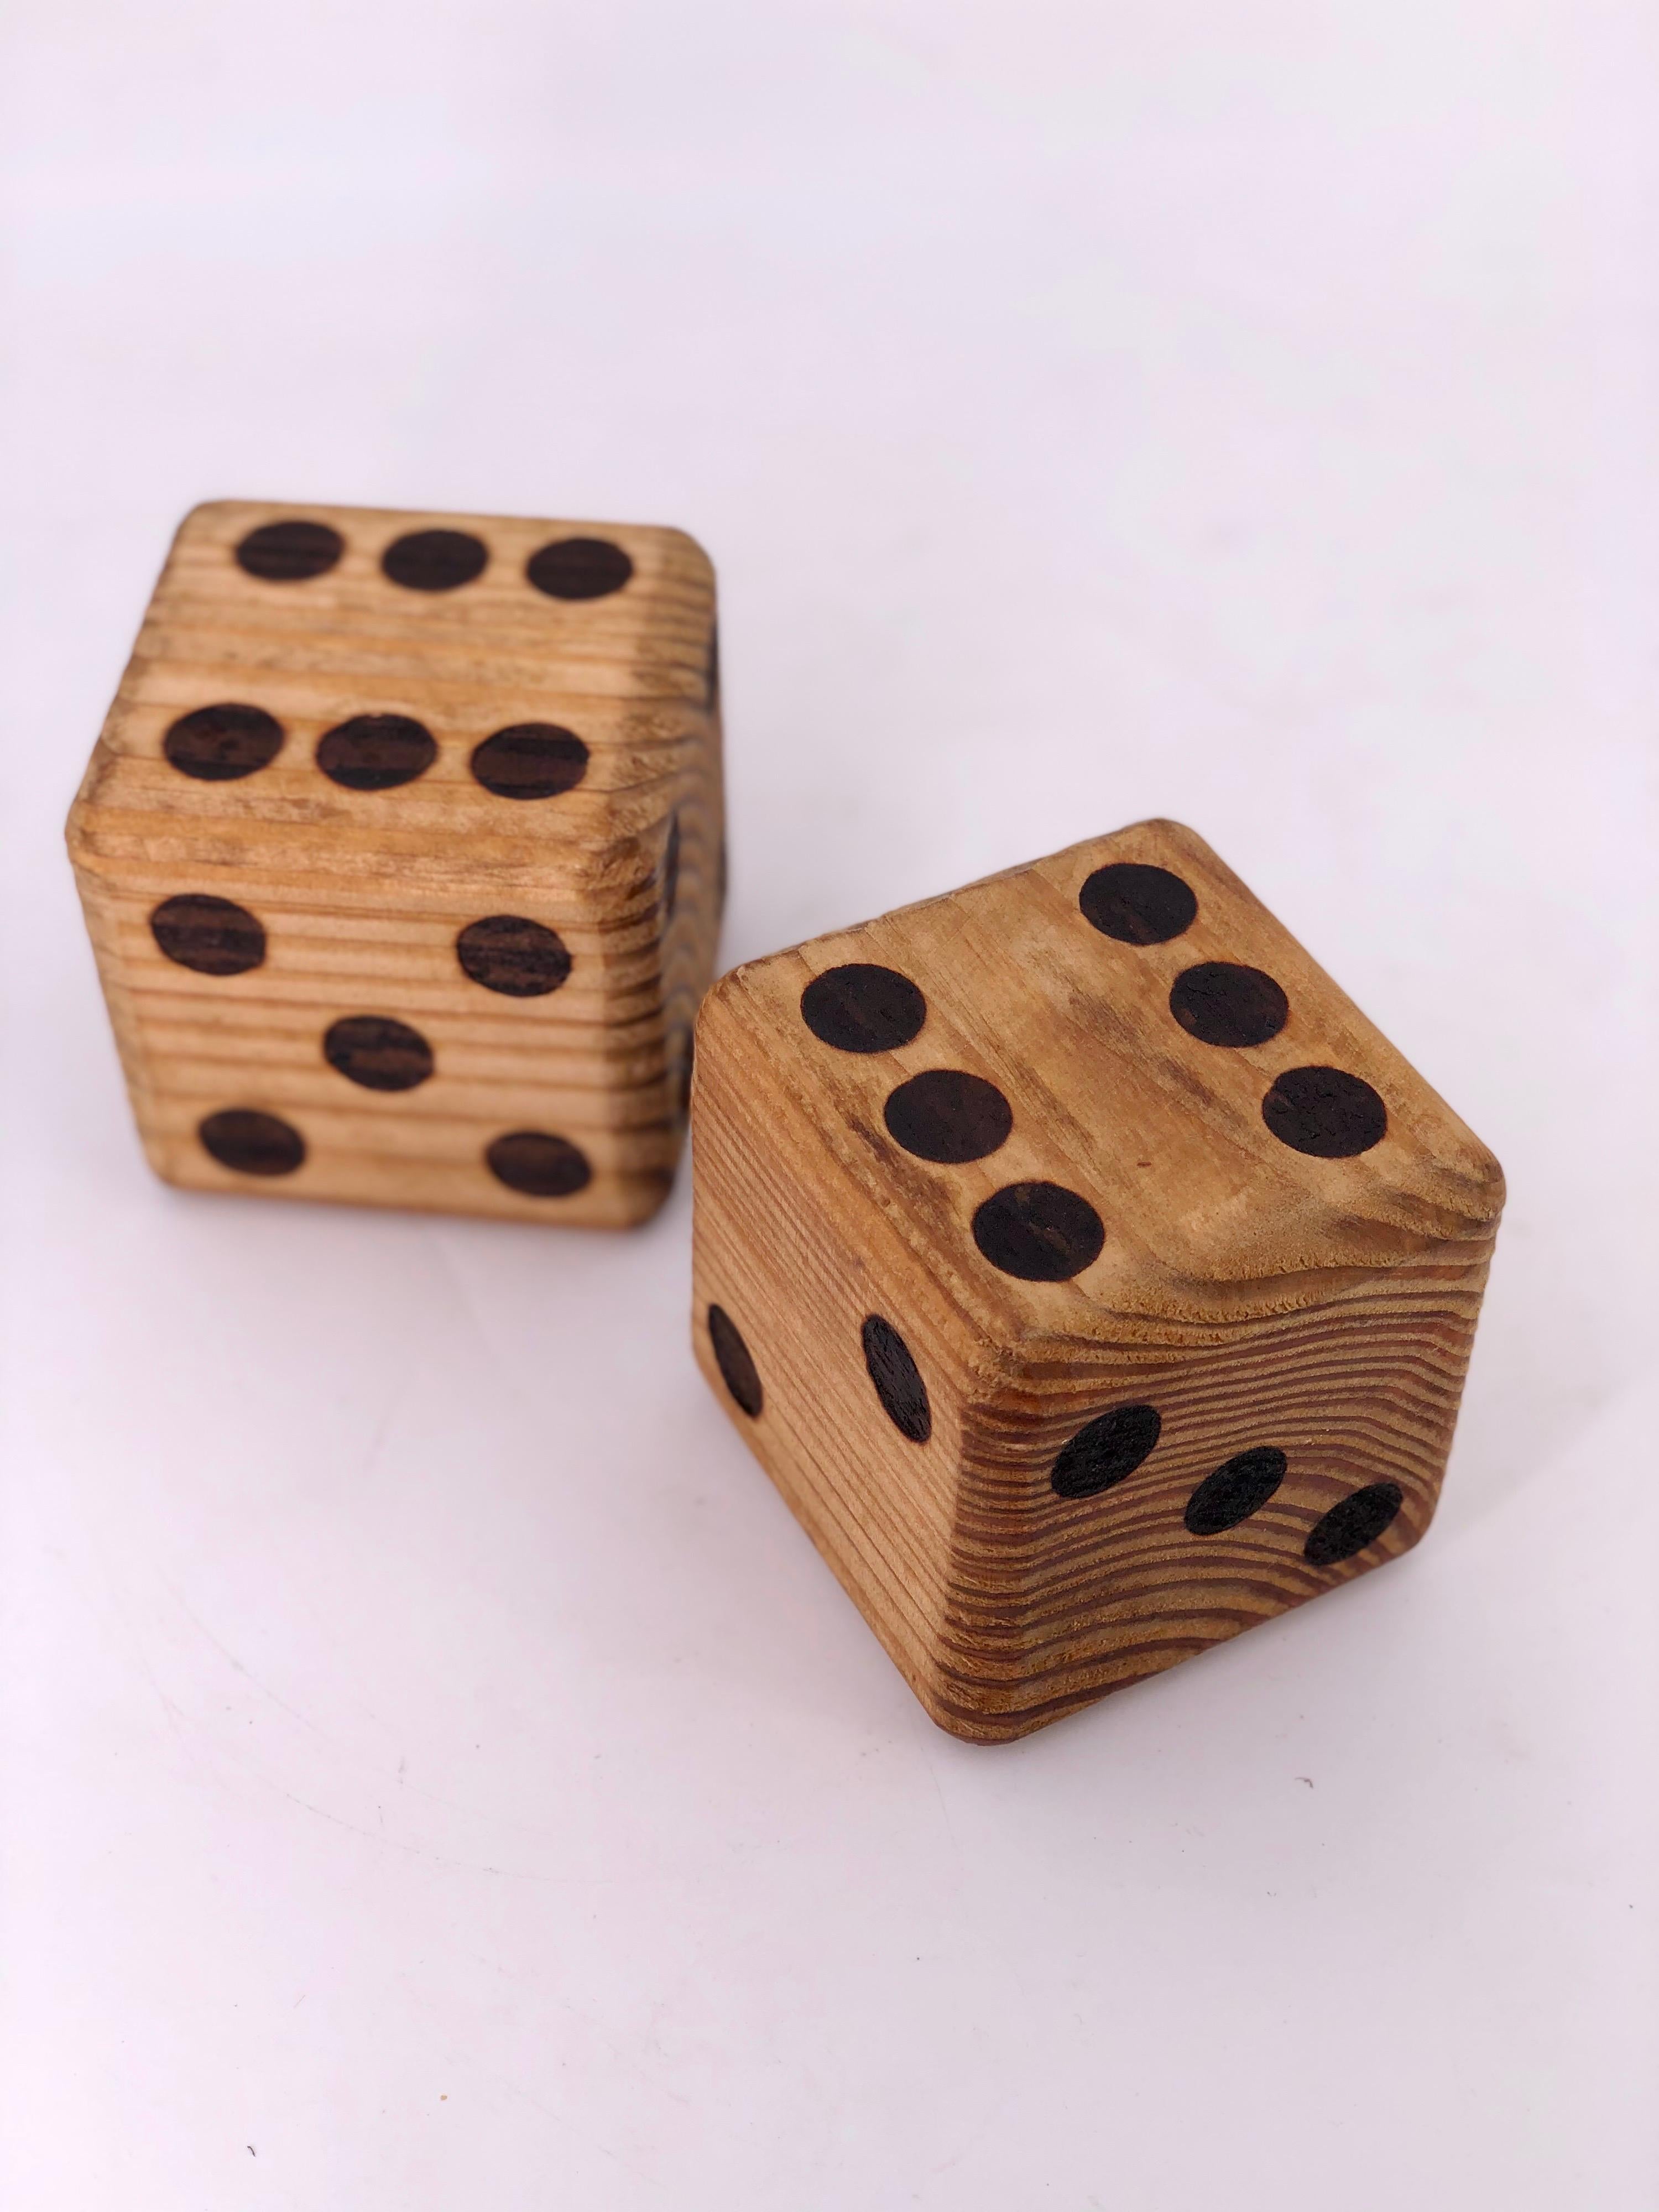 American Pair of Solid Oak Mid-Century Modern Dice Bookends